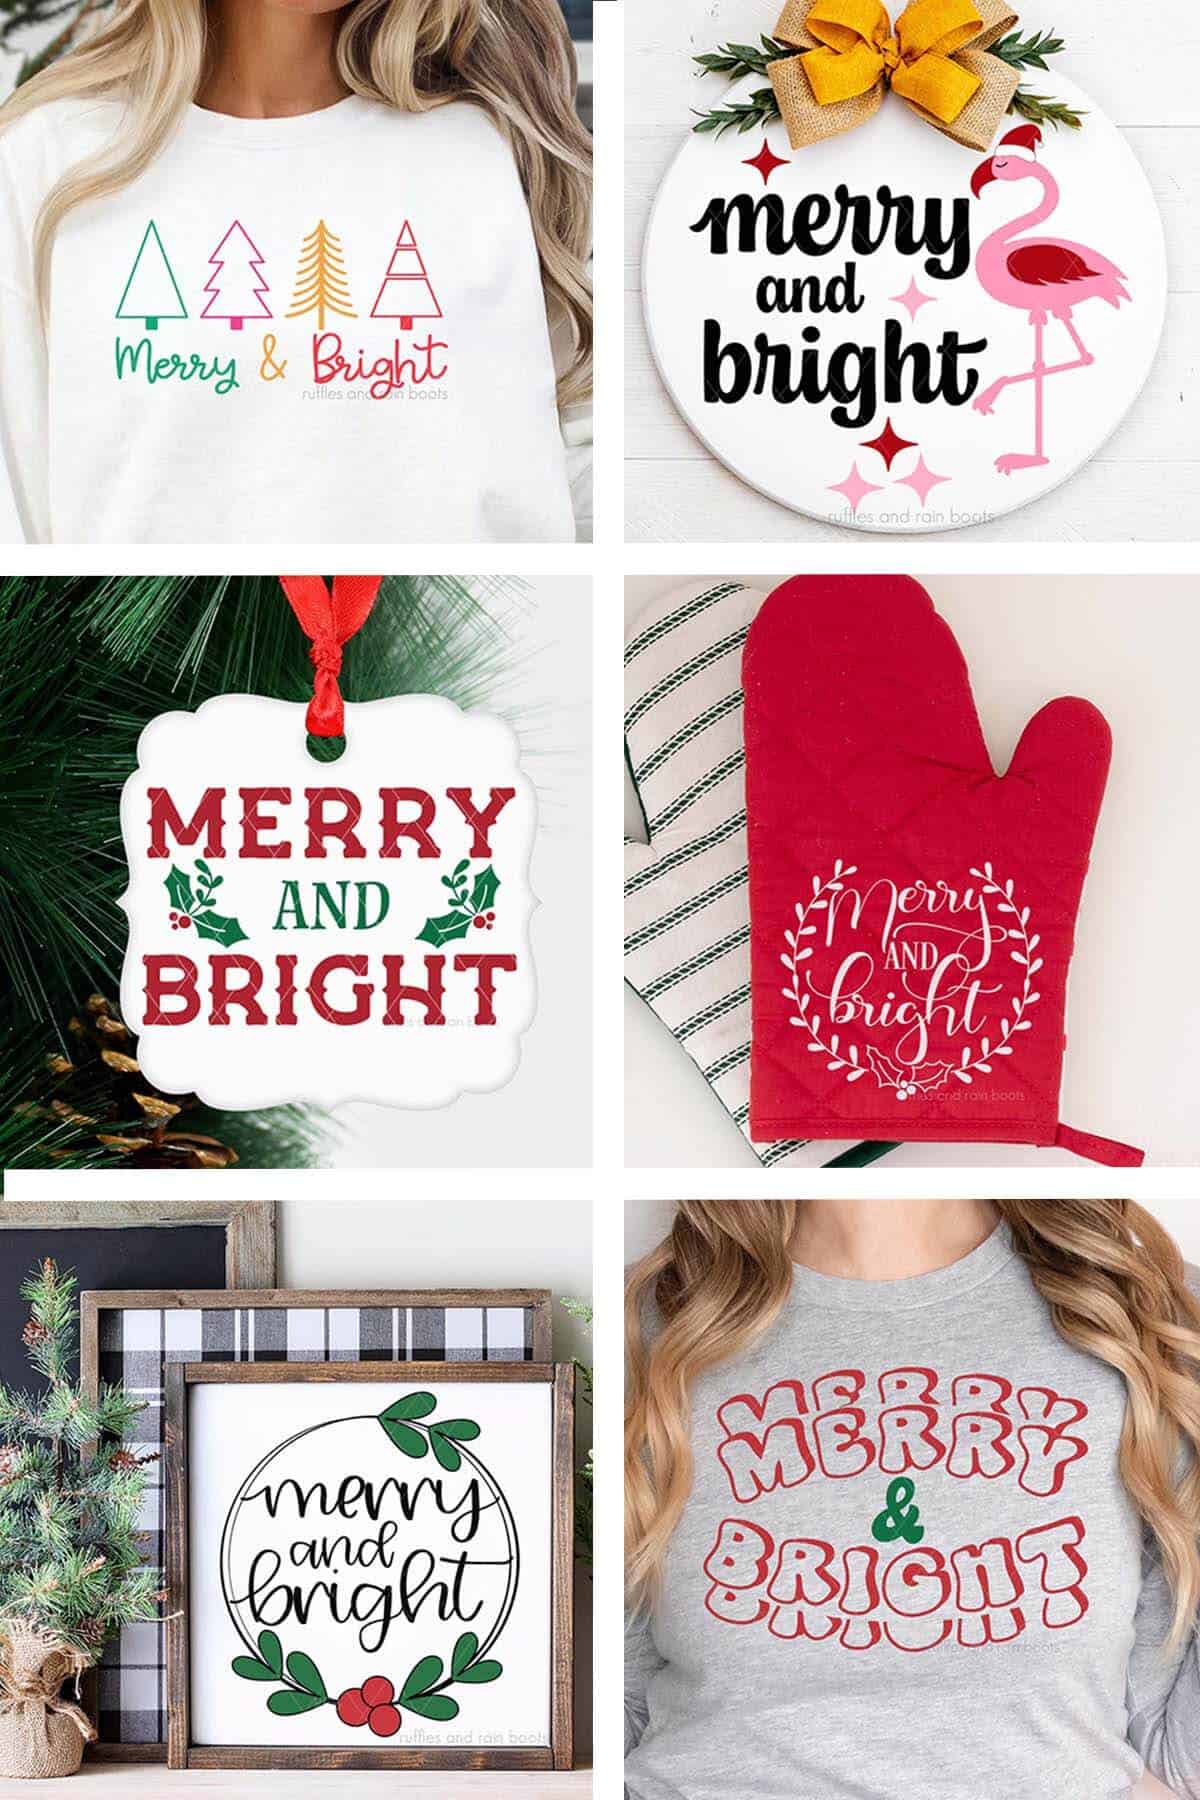 Vertical six image collage of holiday Cricut Christmas gift ideas made with the free Merry and Bright SVG designs from Ruffles and Rain Boots.